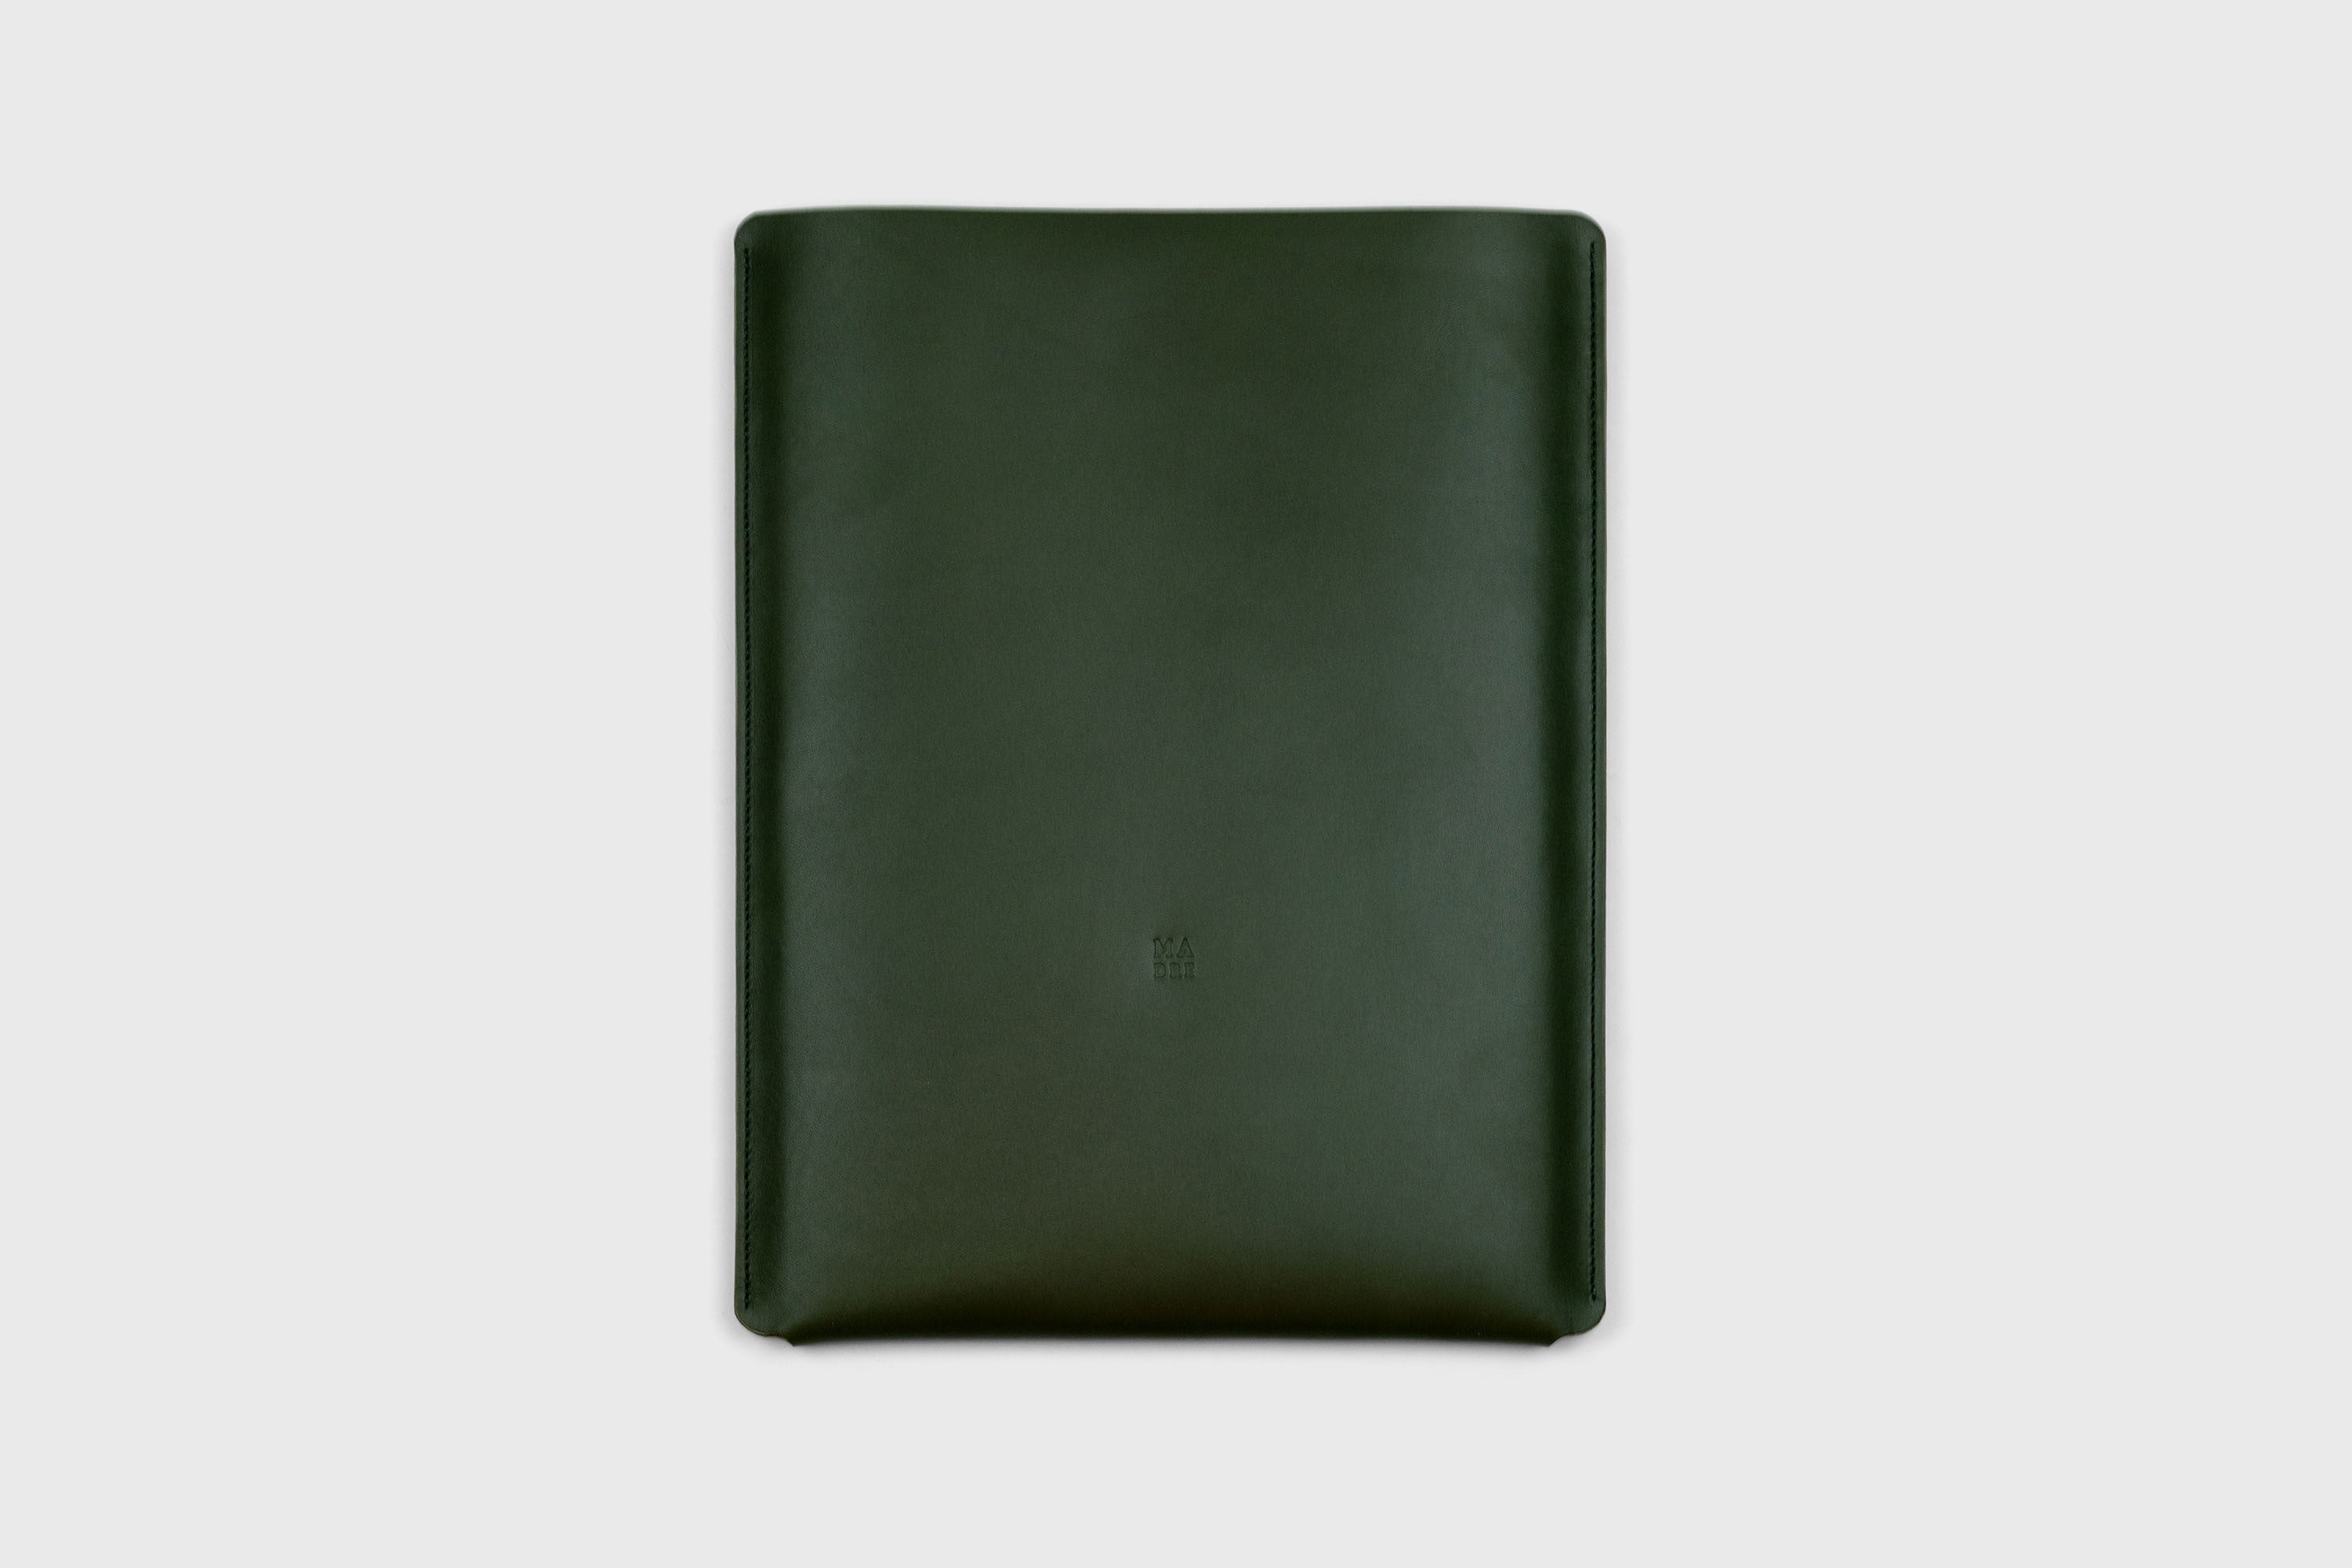 MacBook Air 15 Inch Sleeve Leather Dark Olive Green Colour Minimalistic Design Premium Quality By Atelier Madre Manuel Dreesmann Atelier Madre Barcelona Spain